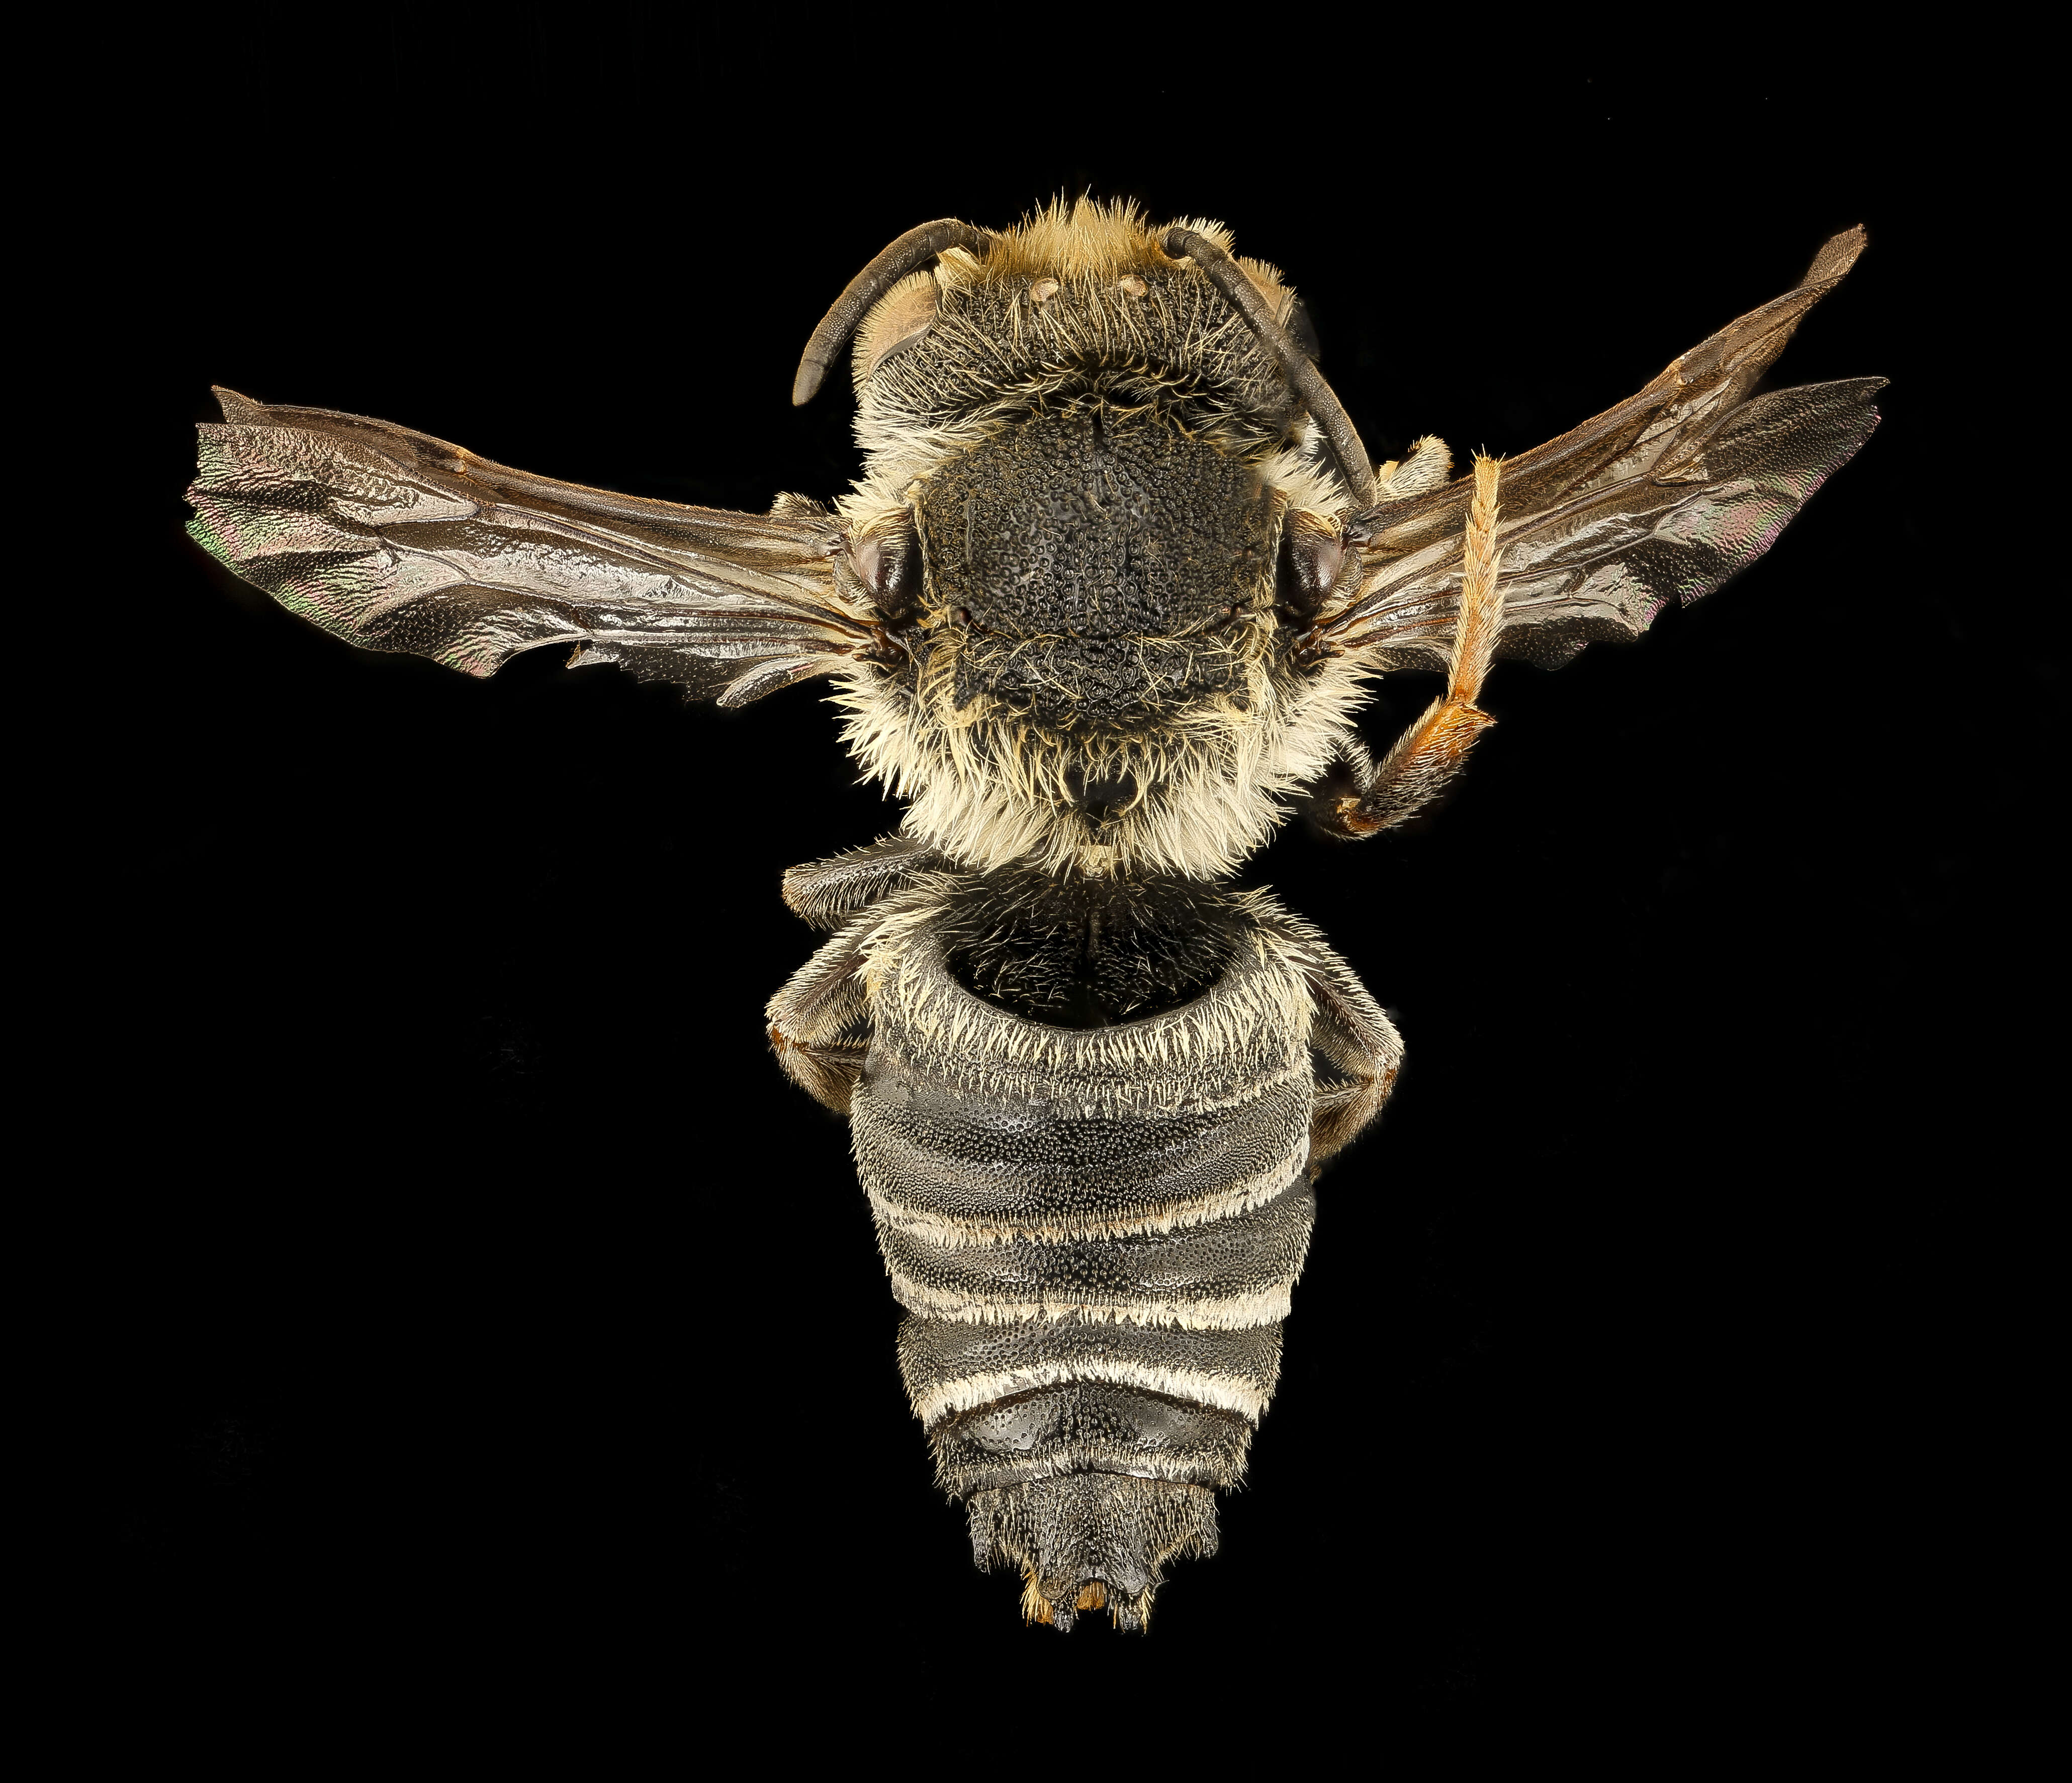 Image of Coelioxys immaculata Cockerell 1912